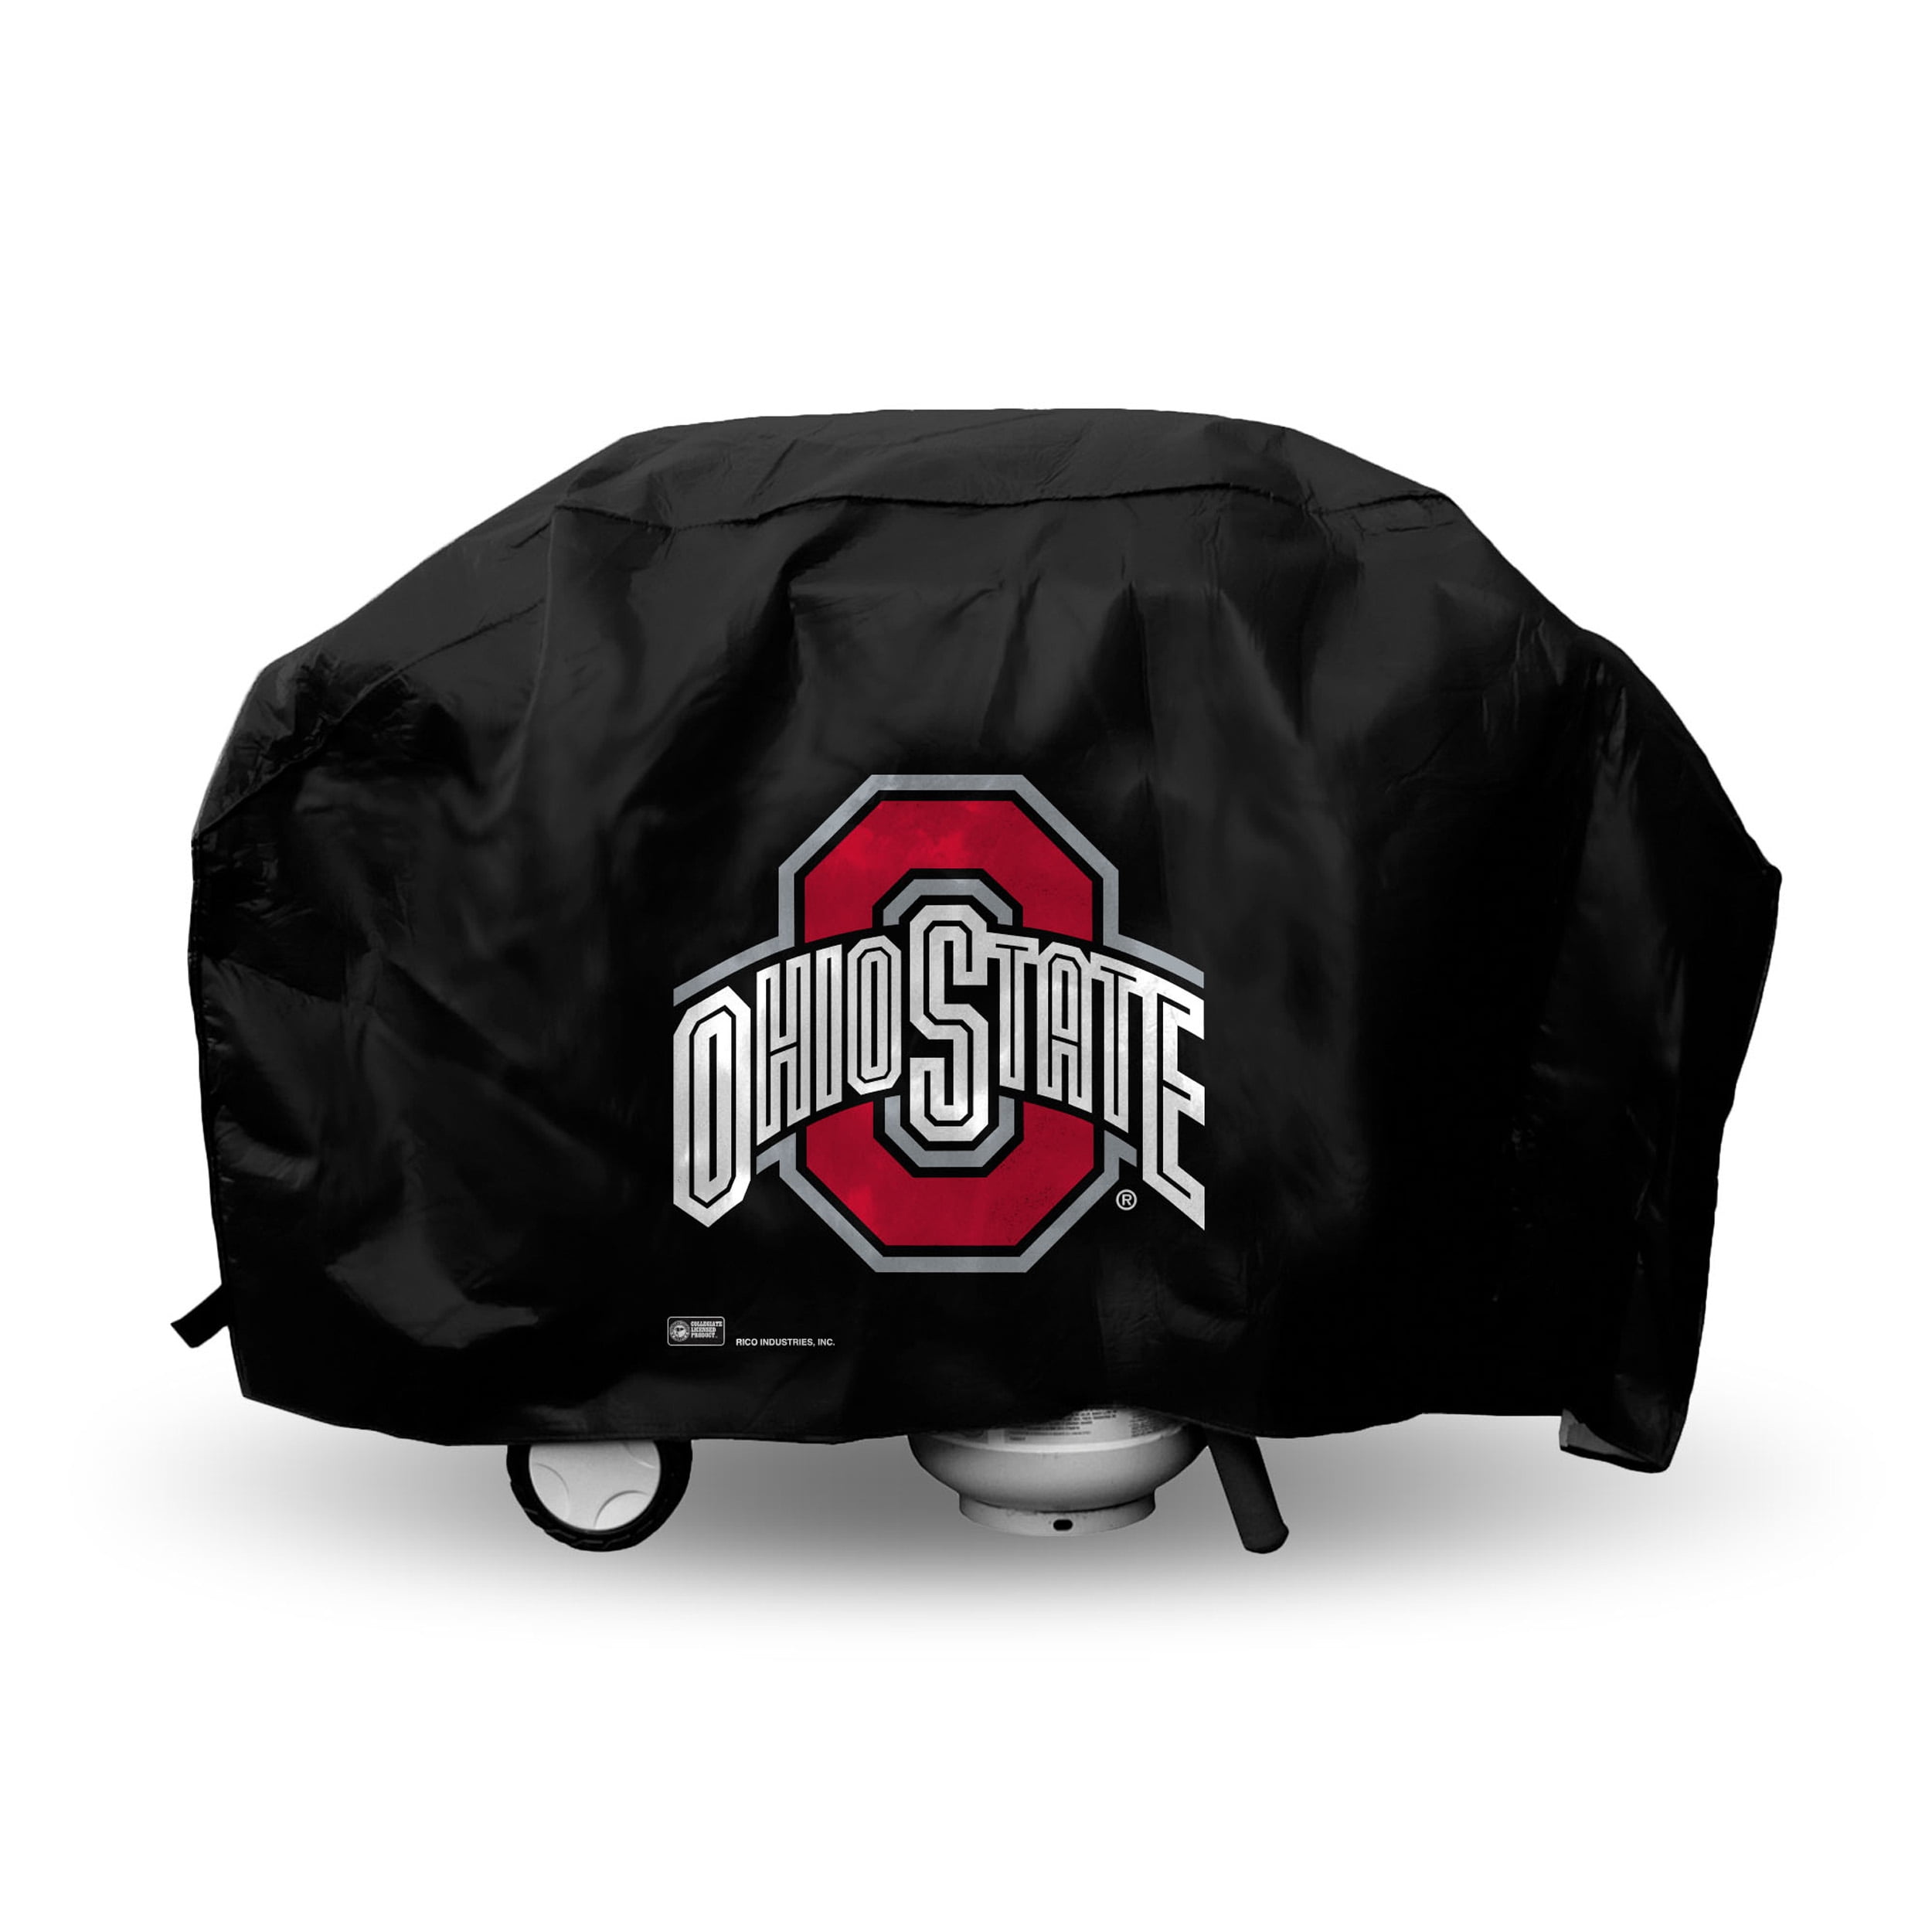 60 Mississippi State Grill Cover by Holland Covers 